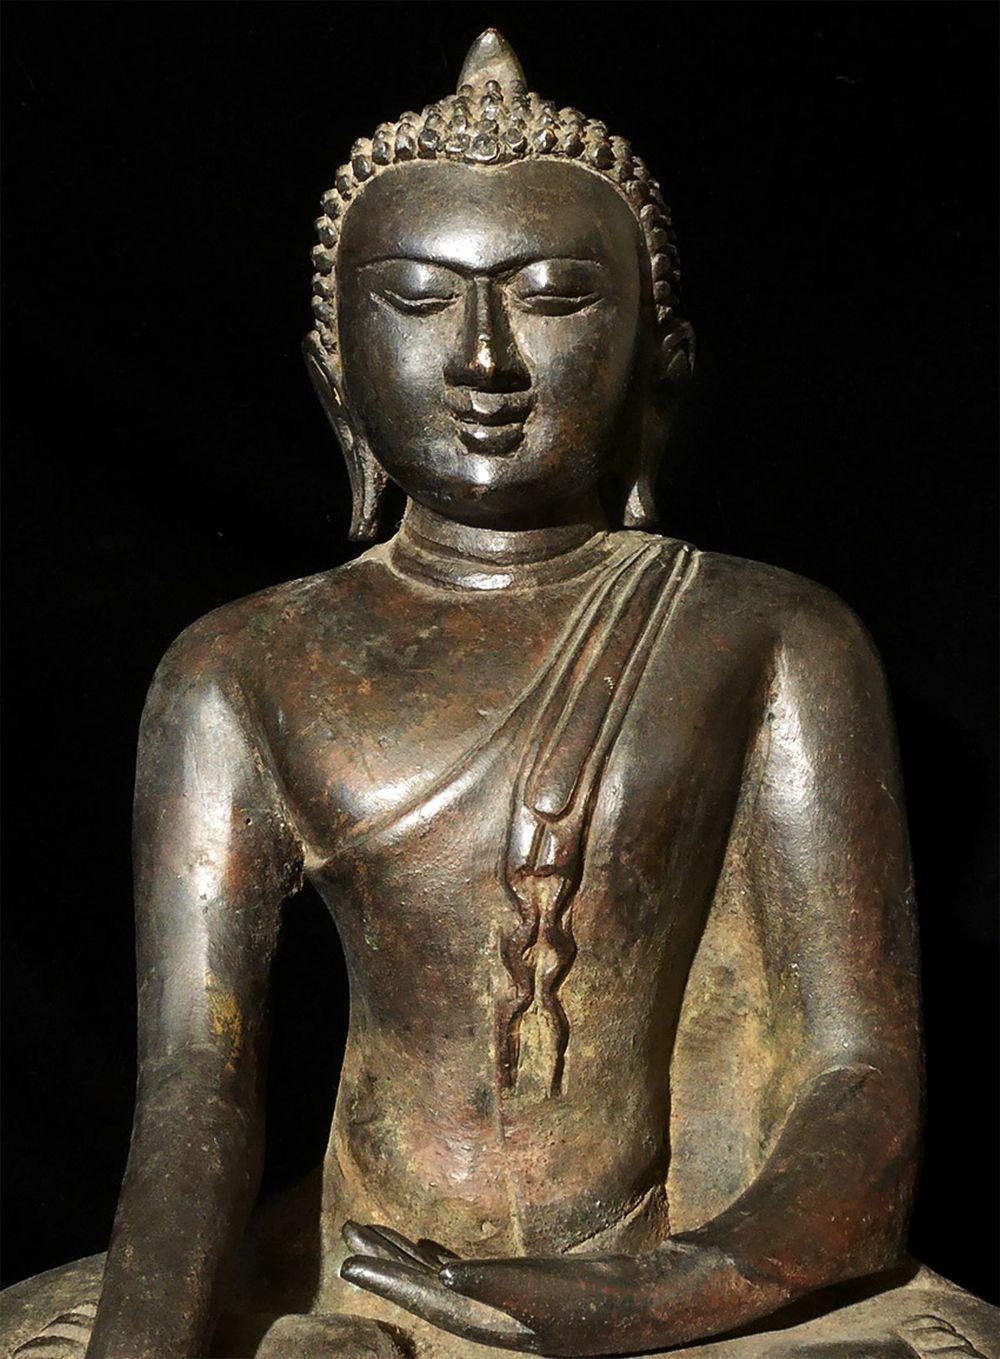 Burmese bronze Buddha, probably 17th/19thC. In a Pagan style, but it is part of a resurgence of this type several hundred years after the actual Pagan period. Buddha is large at 12.25 inches tall, height on custom stand is 14.75 inches. Quite